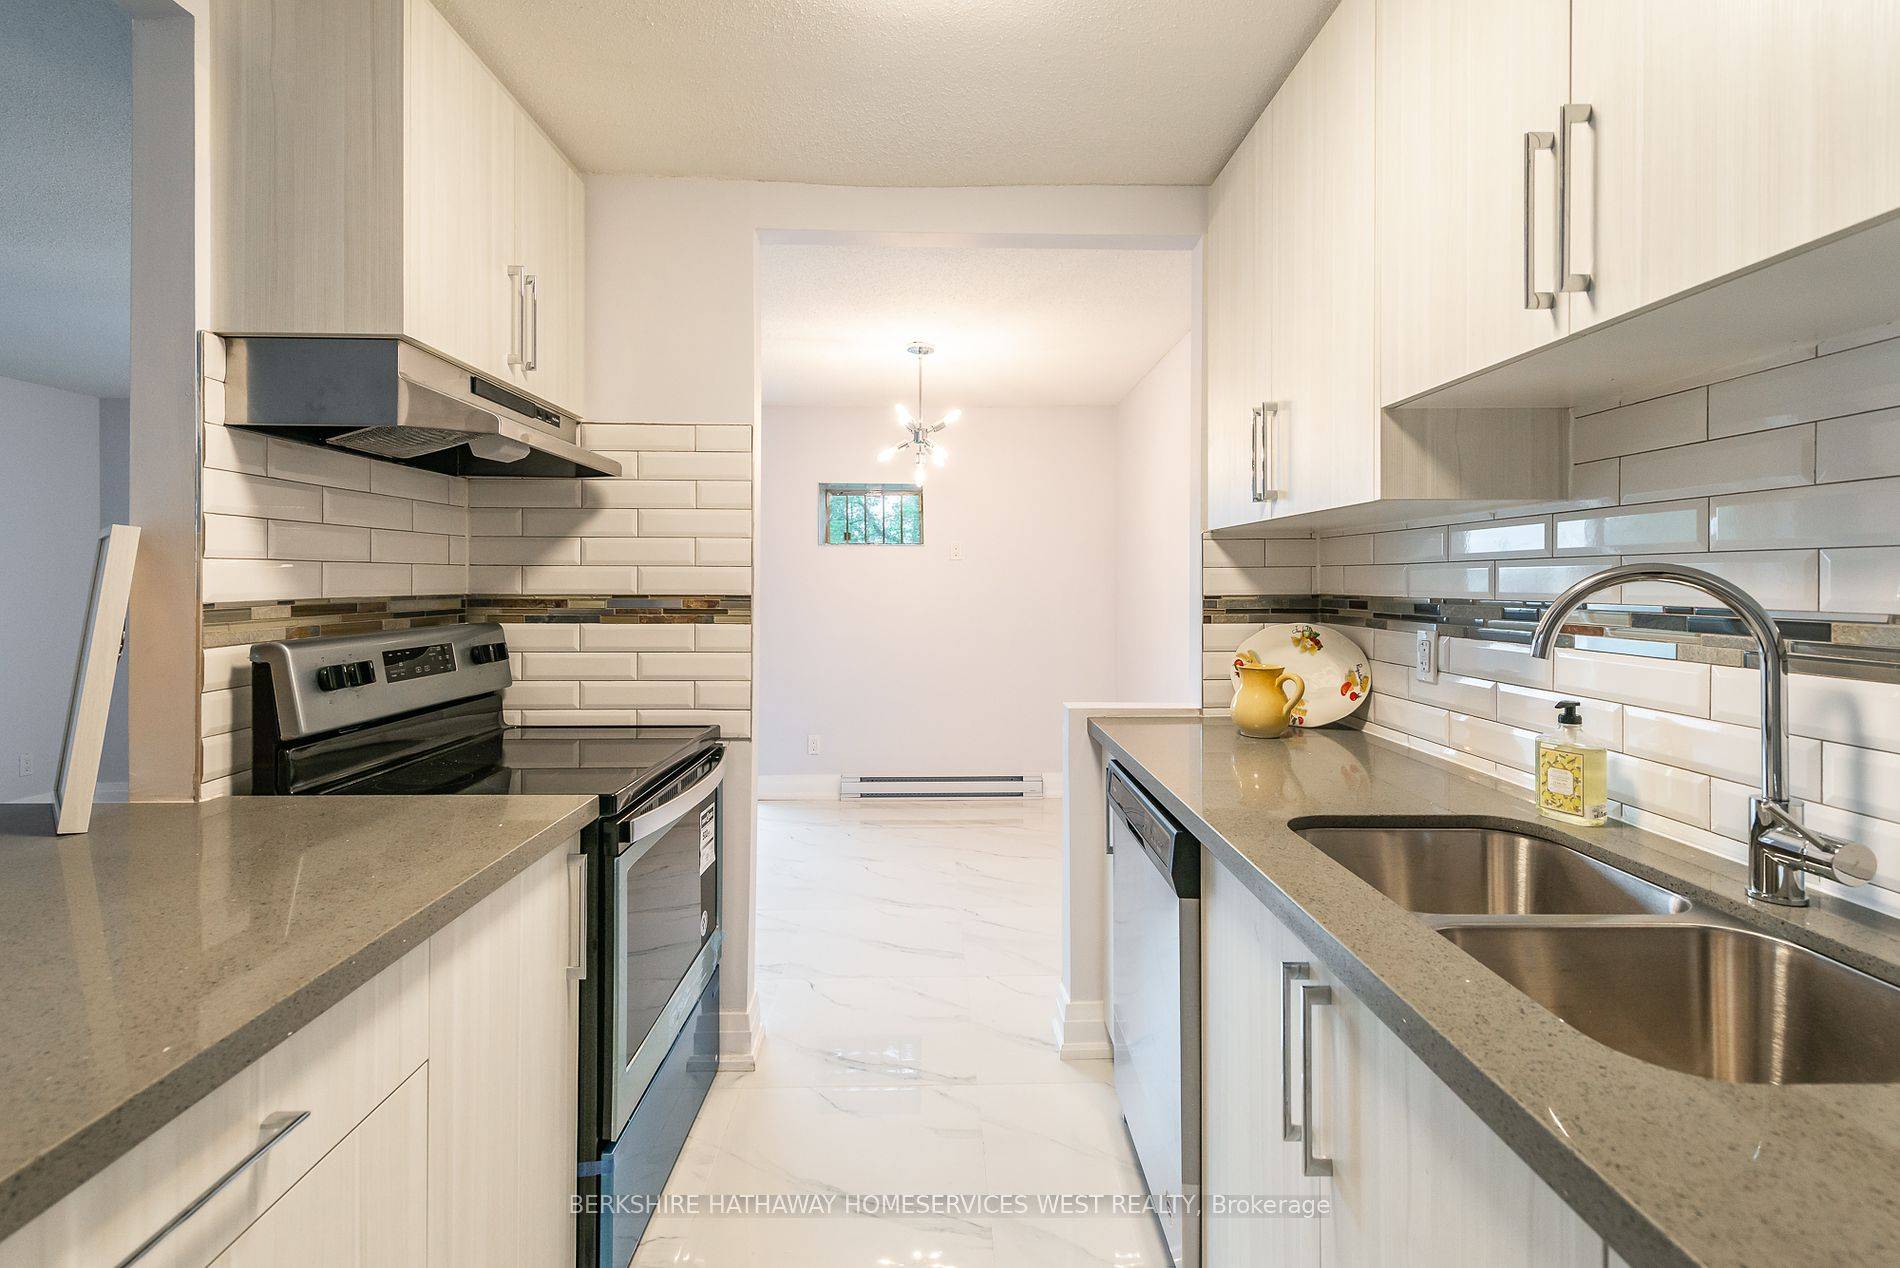 Live in this newly modernized premium 2 bedroom suite on the lower level of three storey walk up.